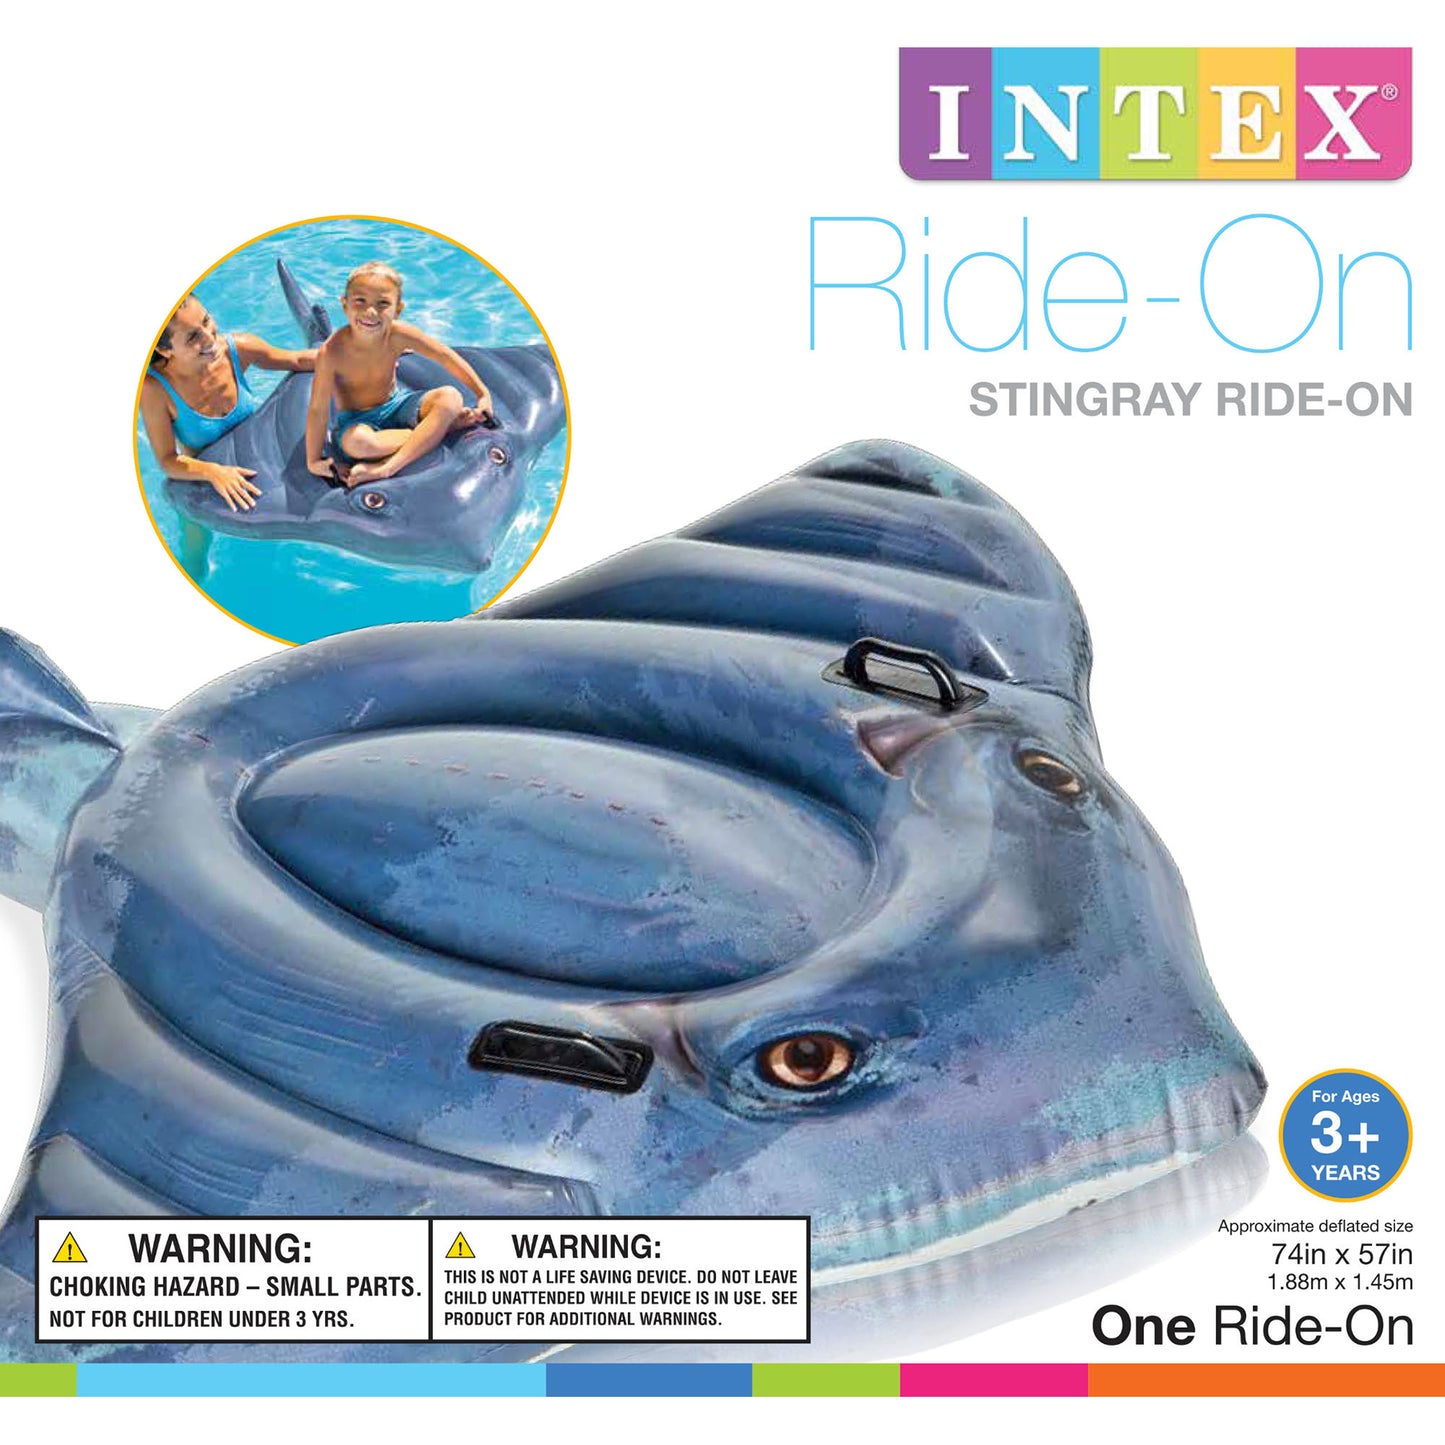 STING RAY RIDE-ON